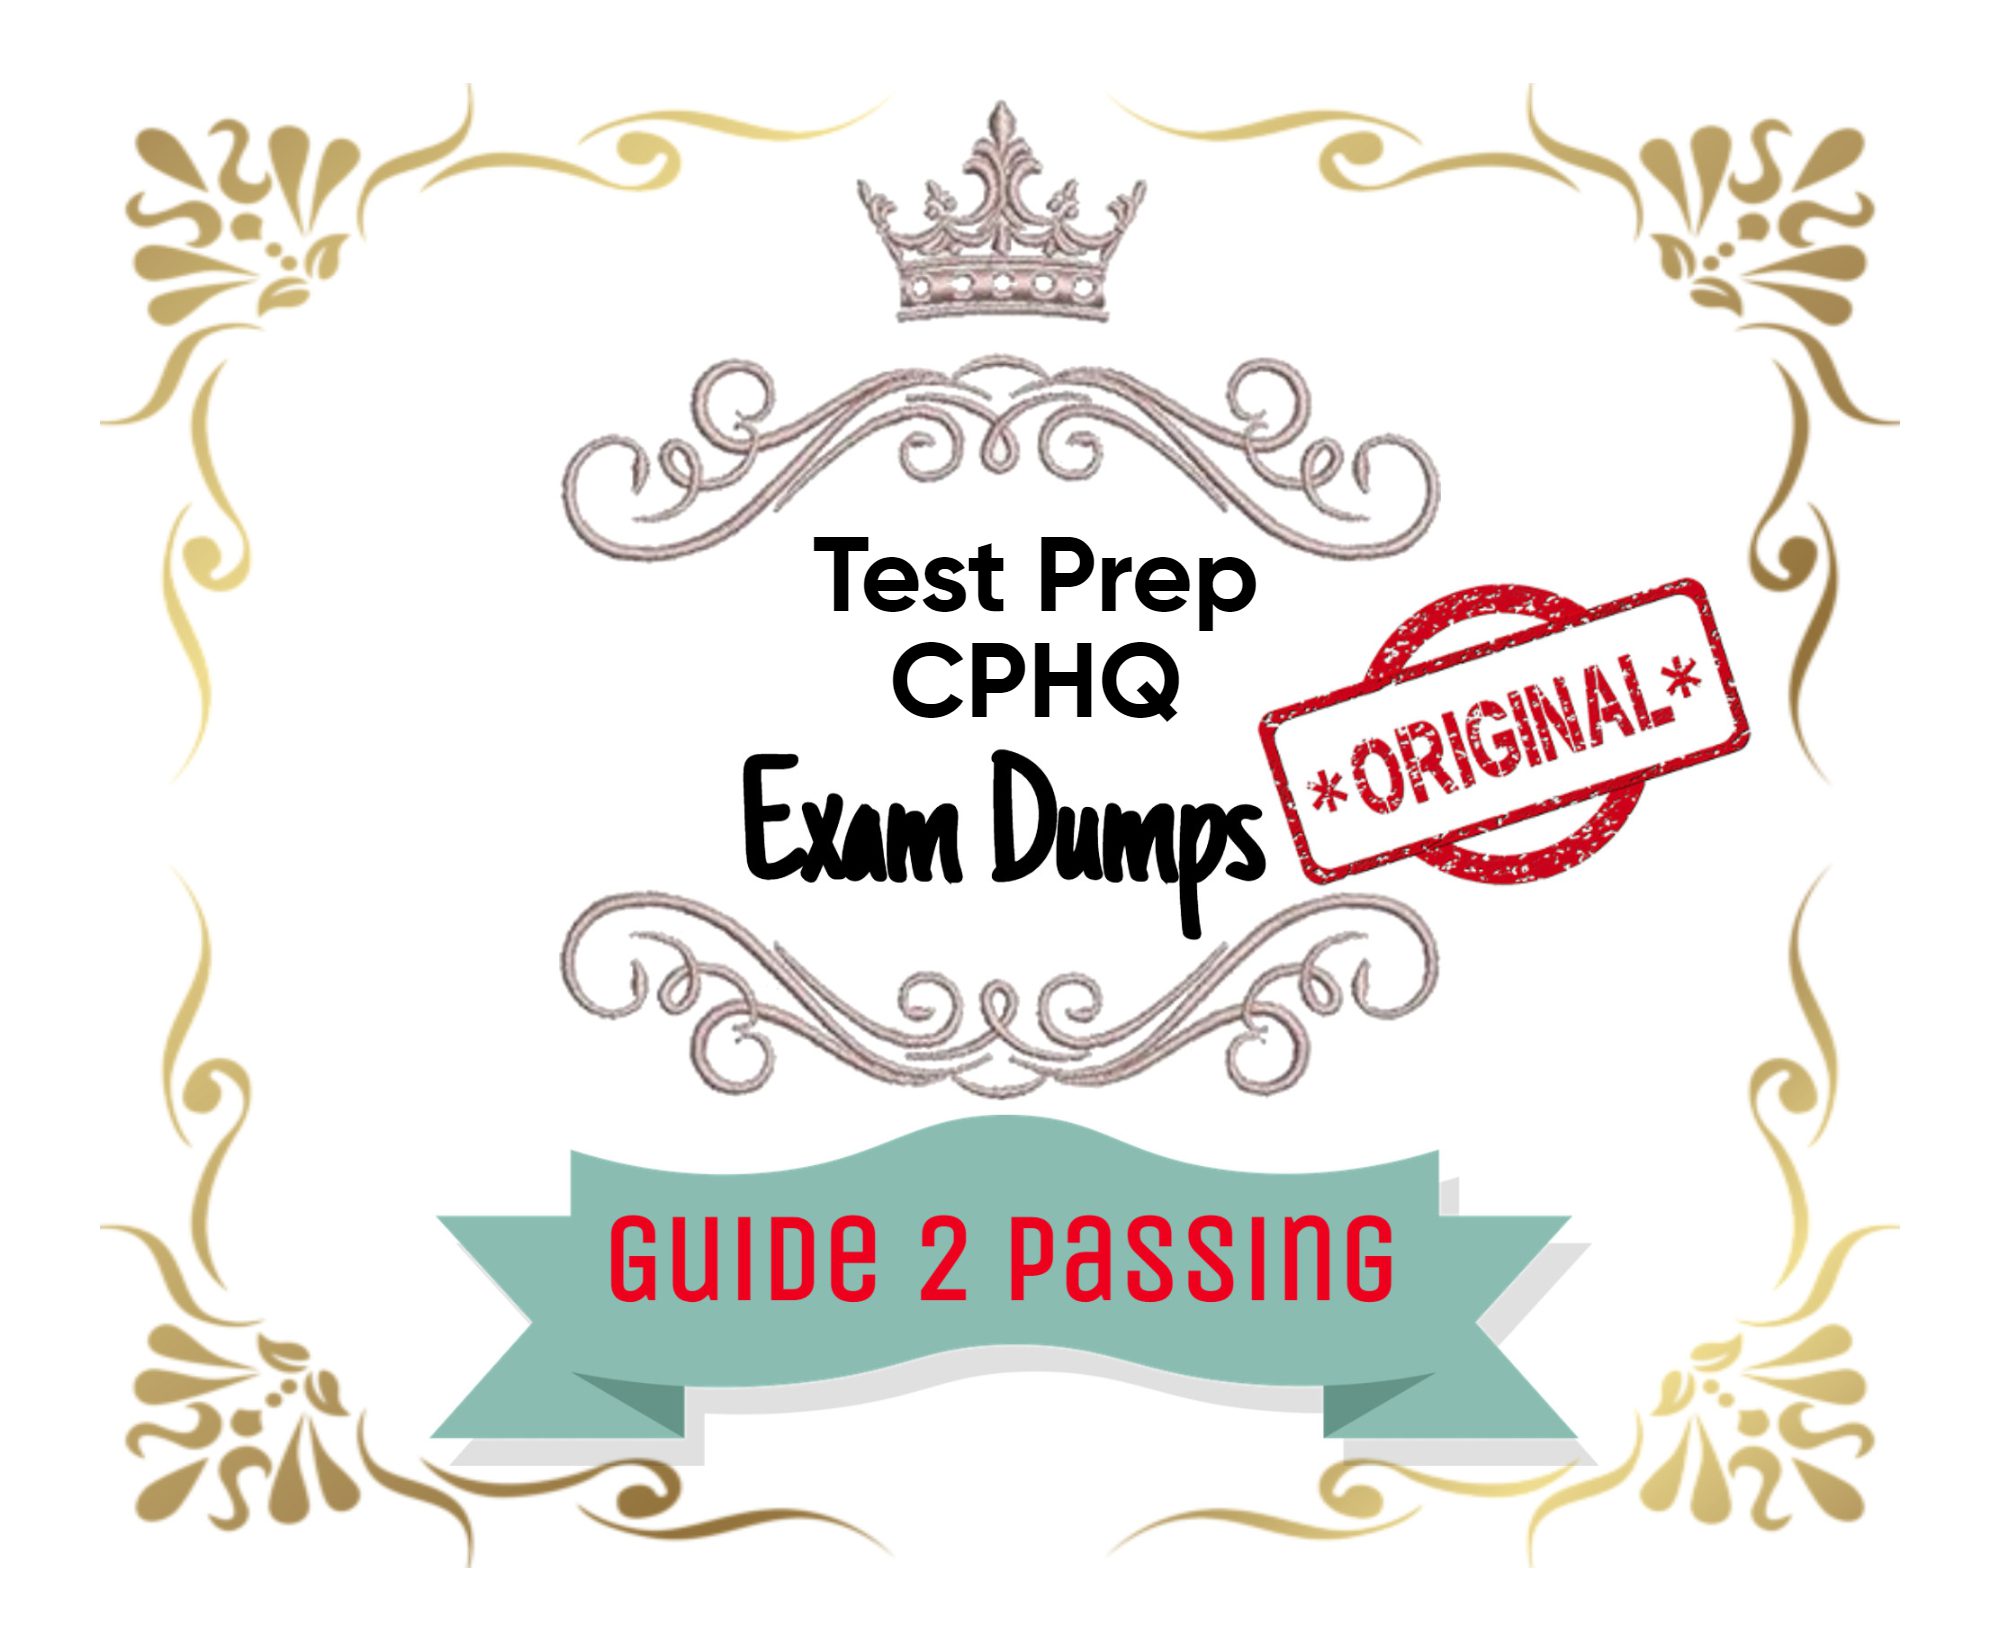 Pass Your Test Prep CPHQ Exam Dumps From Guide 2 Passing